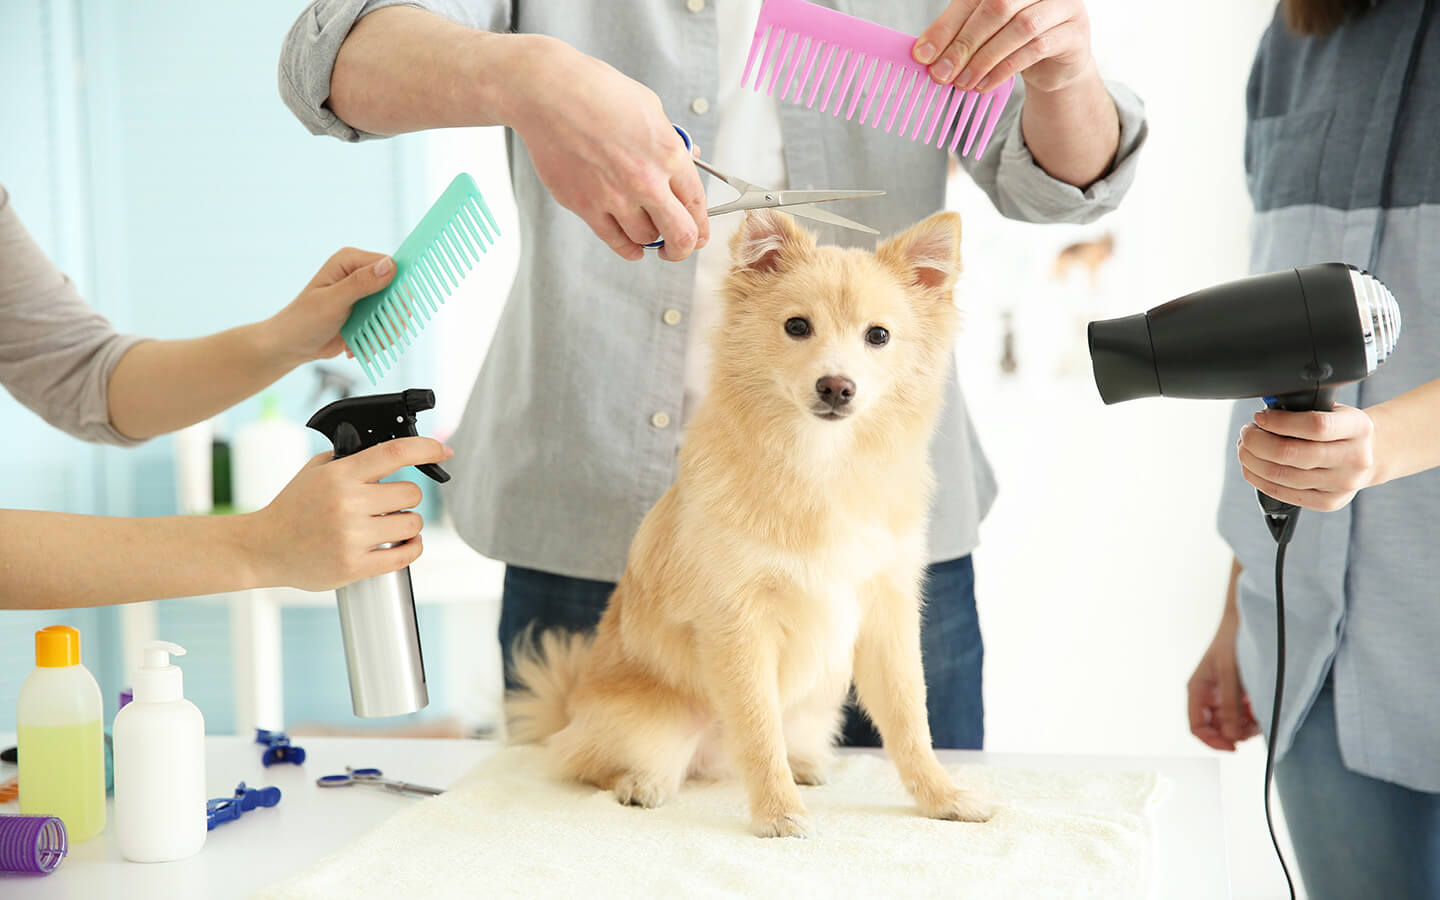 A Birthday Gift to dog by grooming